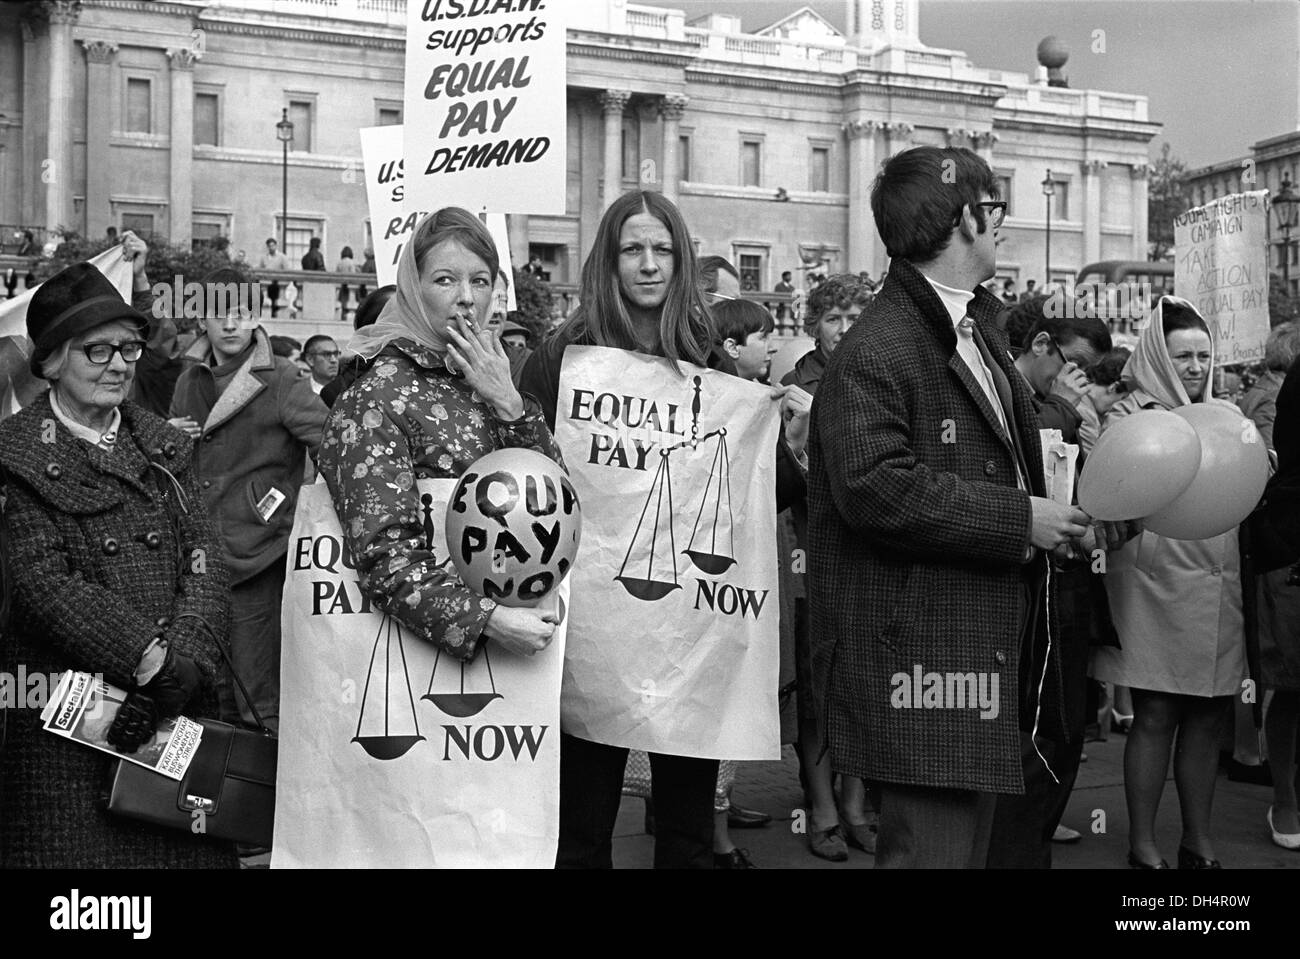 Womens Rights 1960s UK. Trade Union demonstration for Equal Pay Now for women. USDAW rally Trafalgar Square London England 1968. HOMER SYKES Stock Photo